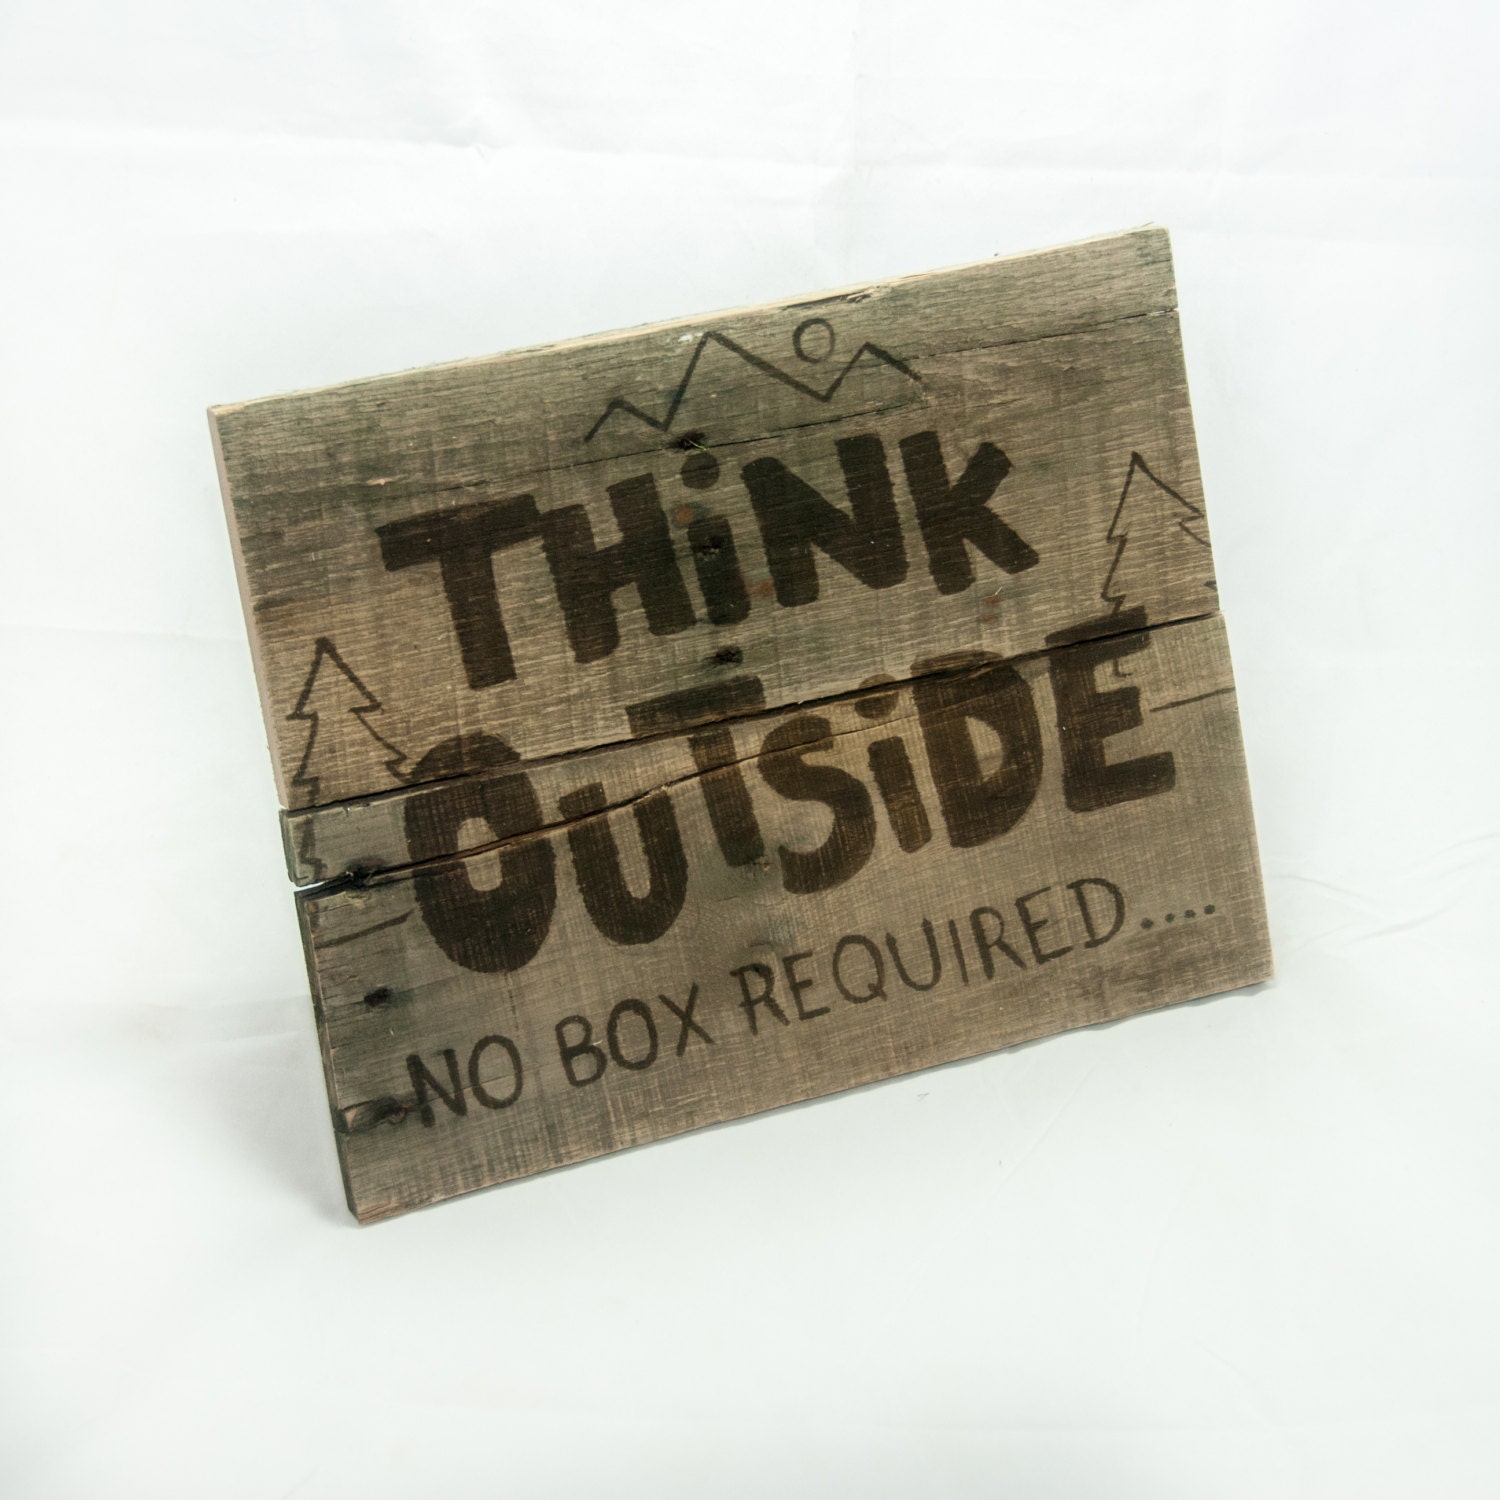 Request something have and signs custom a custom order for rustic you. made  outdoor just